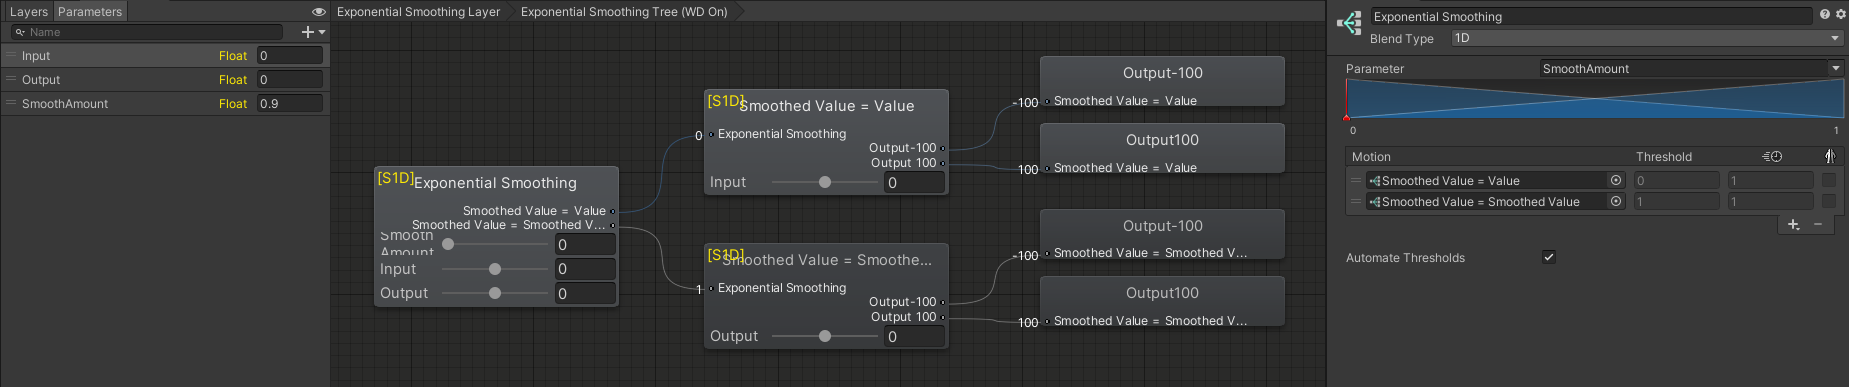 An example of an Exponential Smoothing Blend Tree. Here the bounds are chosen to be [-100, 100], but you can change these as needed.